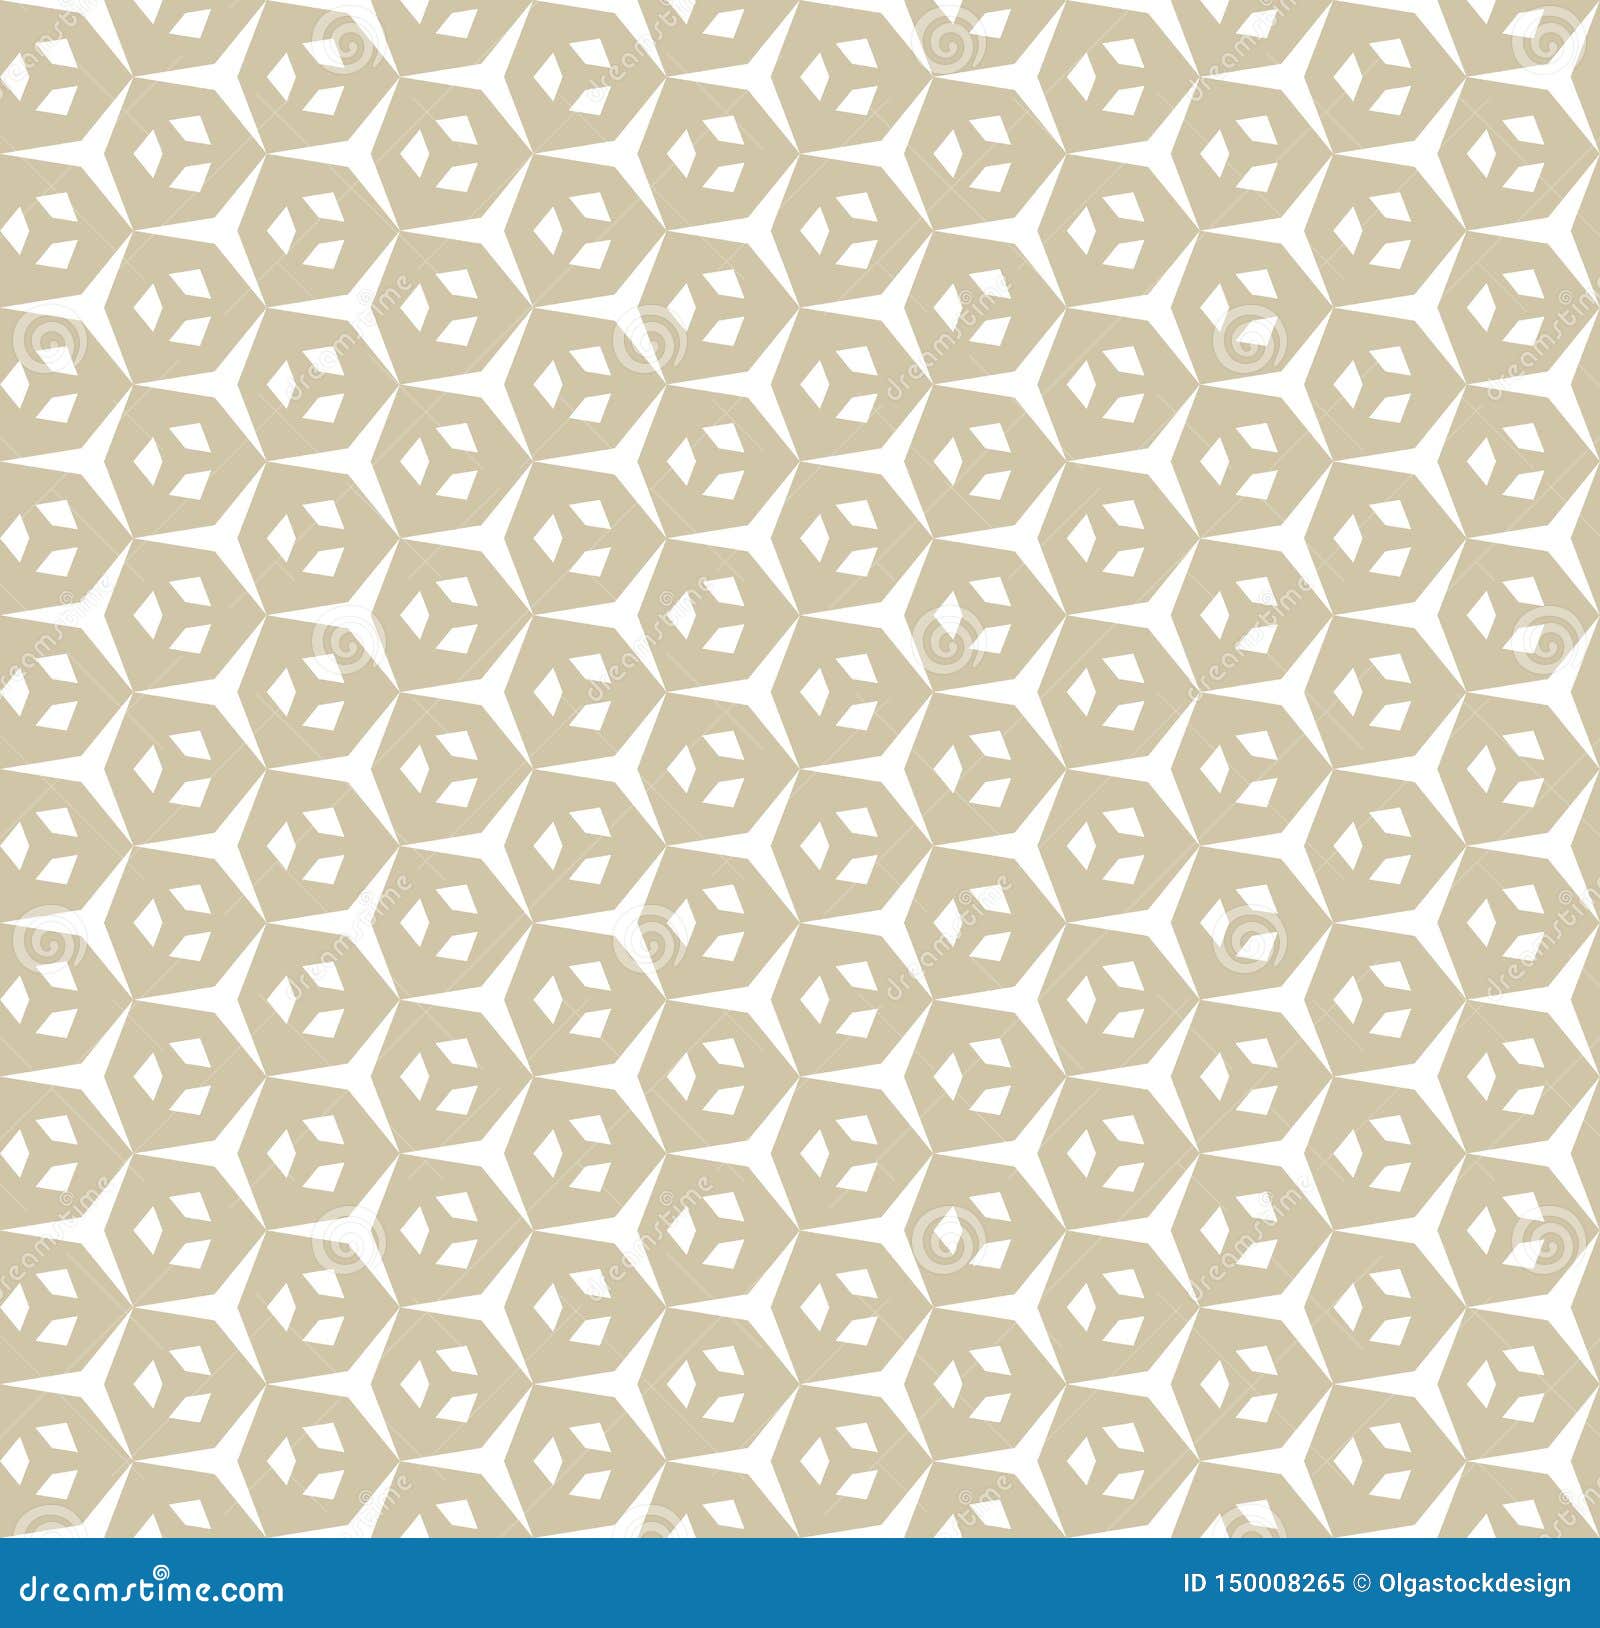 Vector Golden Geometric Seamless Pattern With Small Diamond Shapes